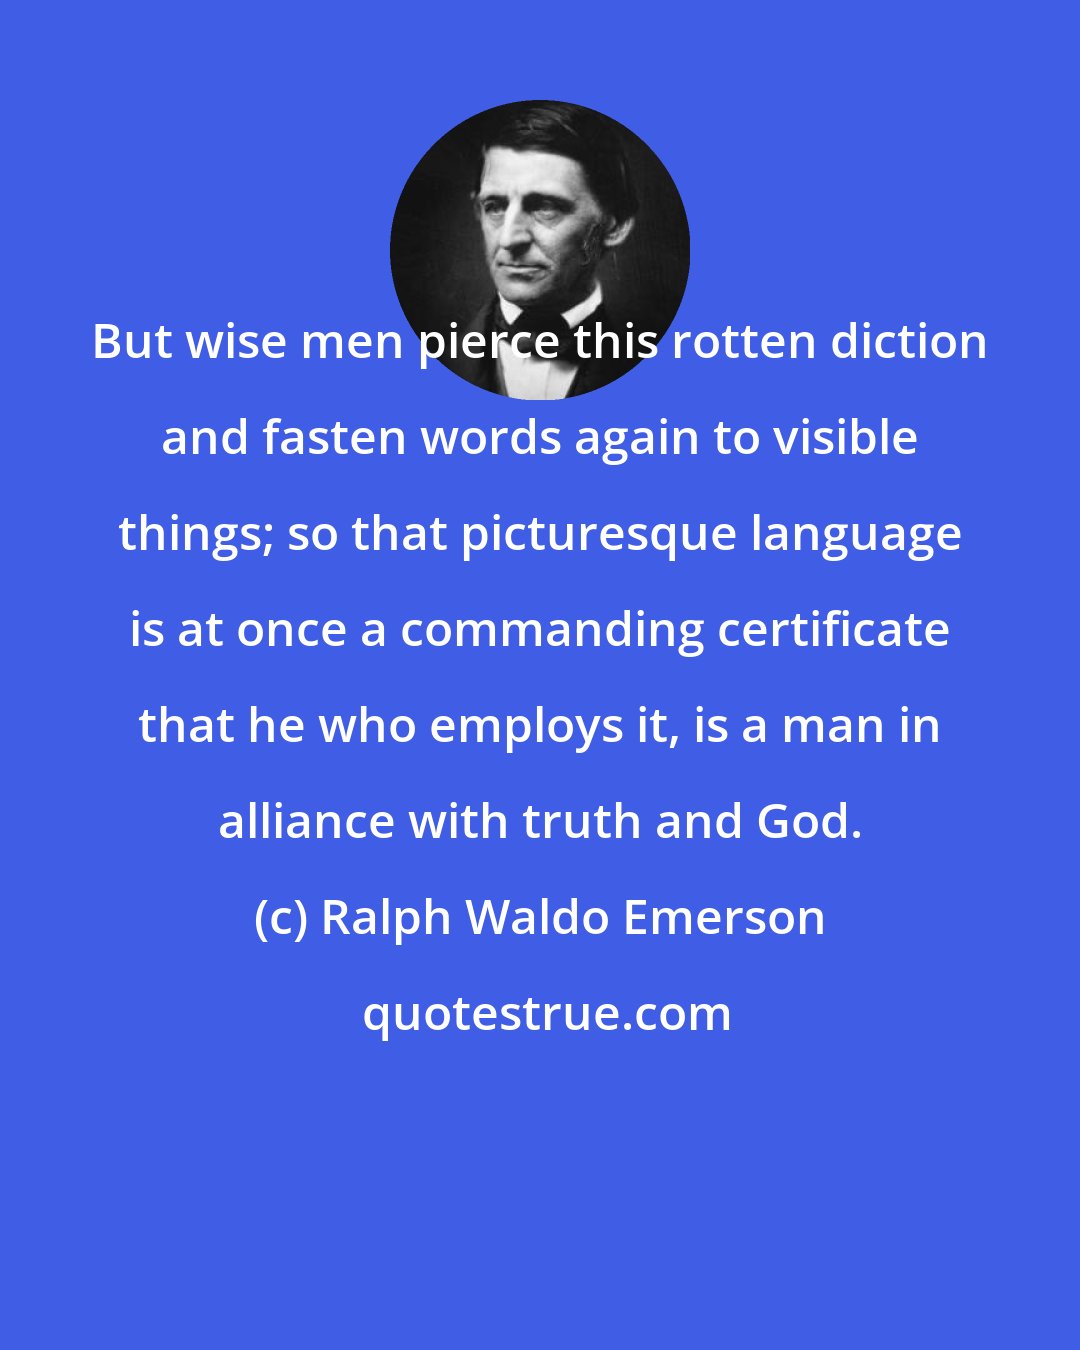 Ralph Waldo Emerson: But wise men pierce this rotten diction and fasten words again to visible things; so that picturesque language is at once a commanding certificate that he who employs it, is a man in alliance with truth and God.